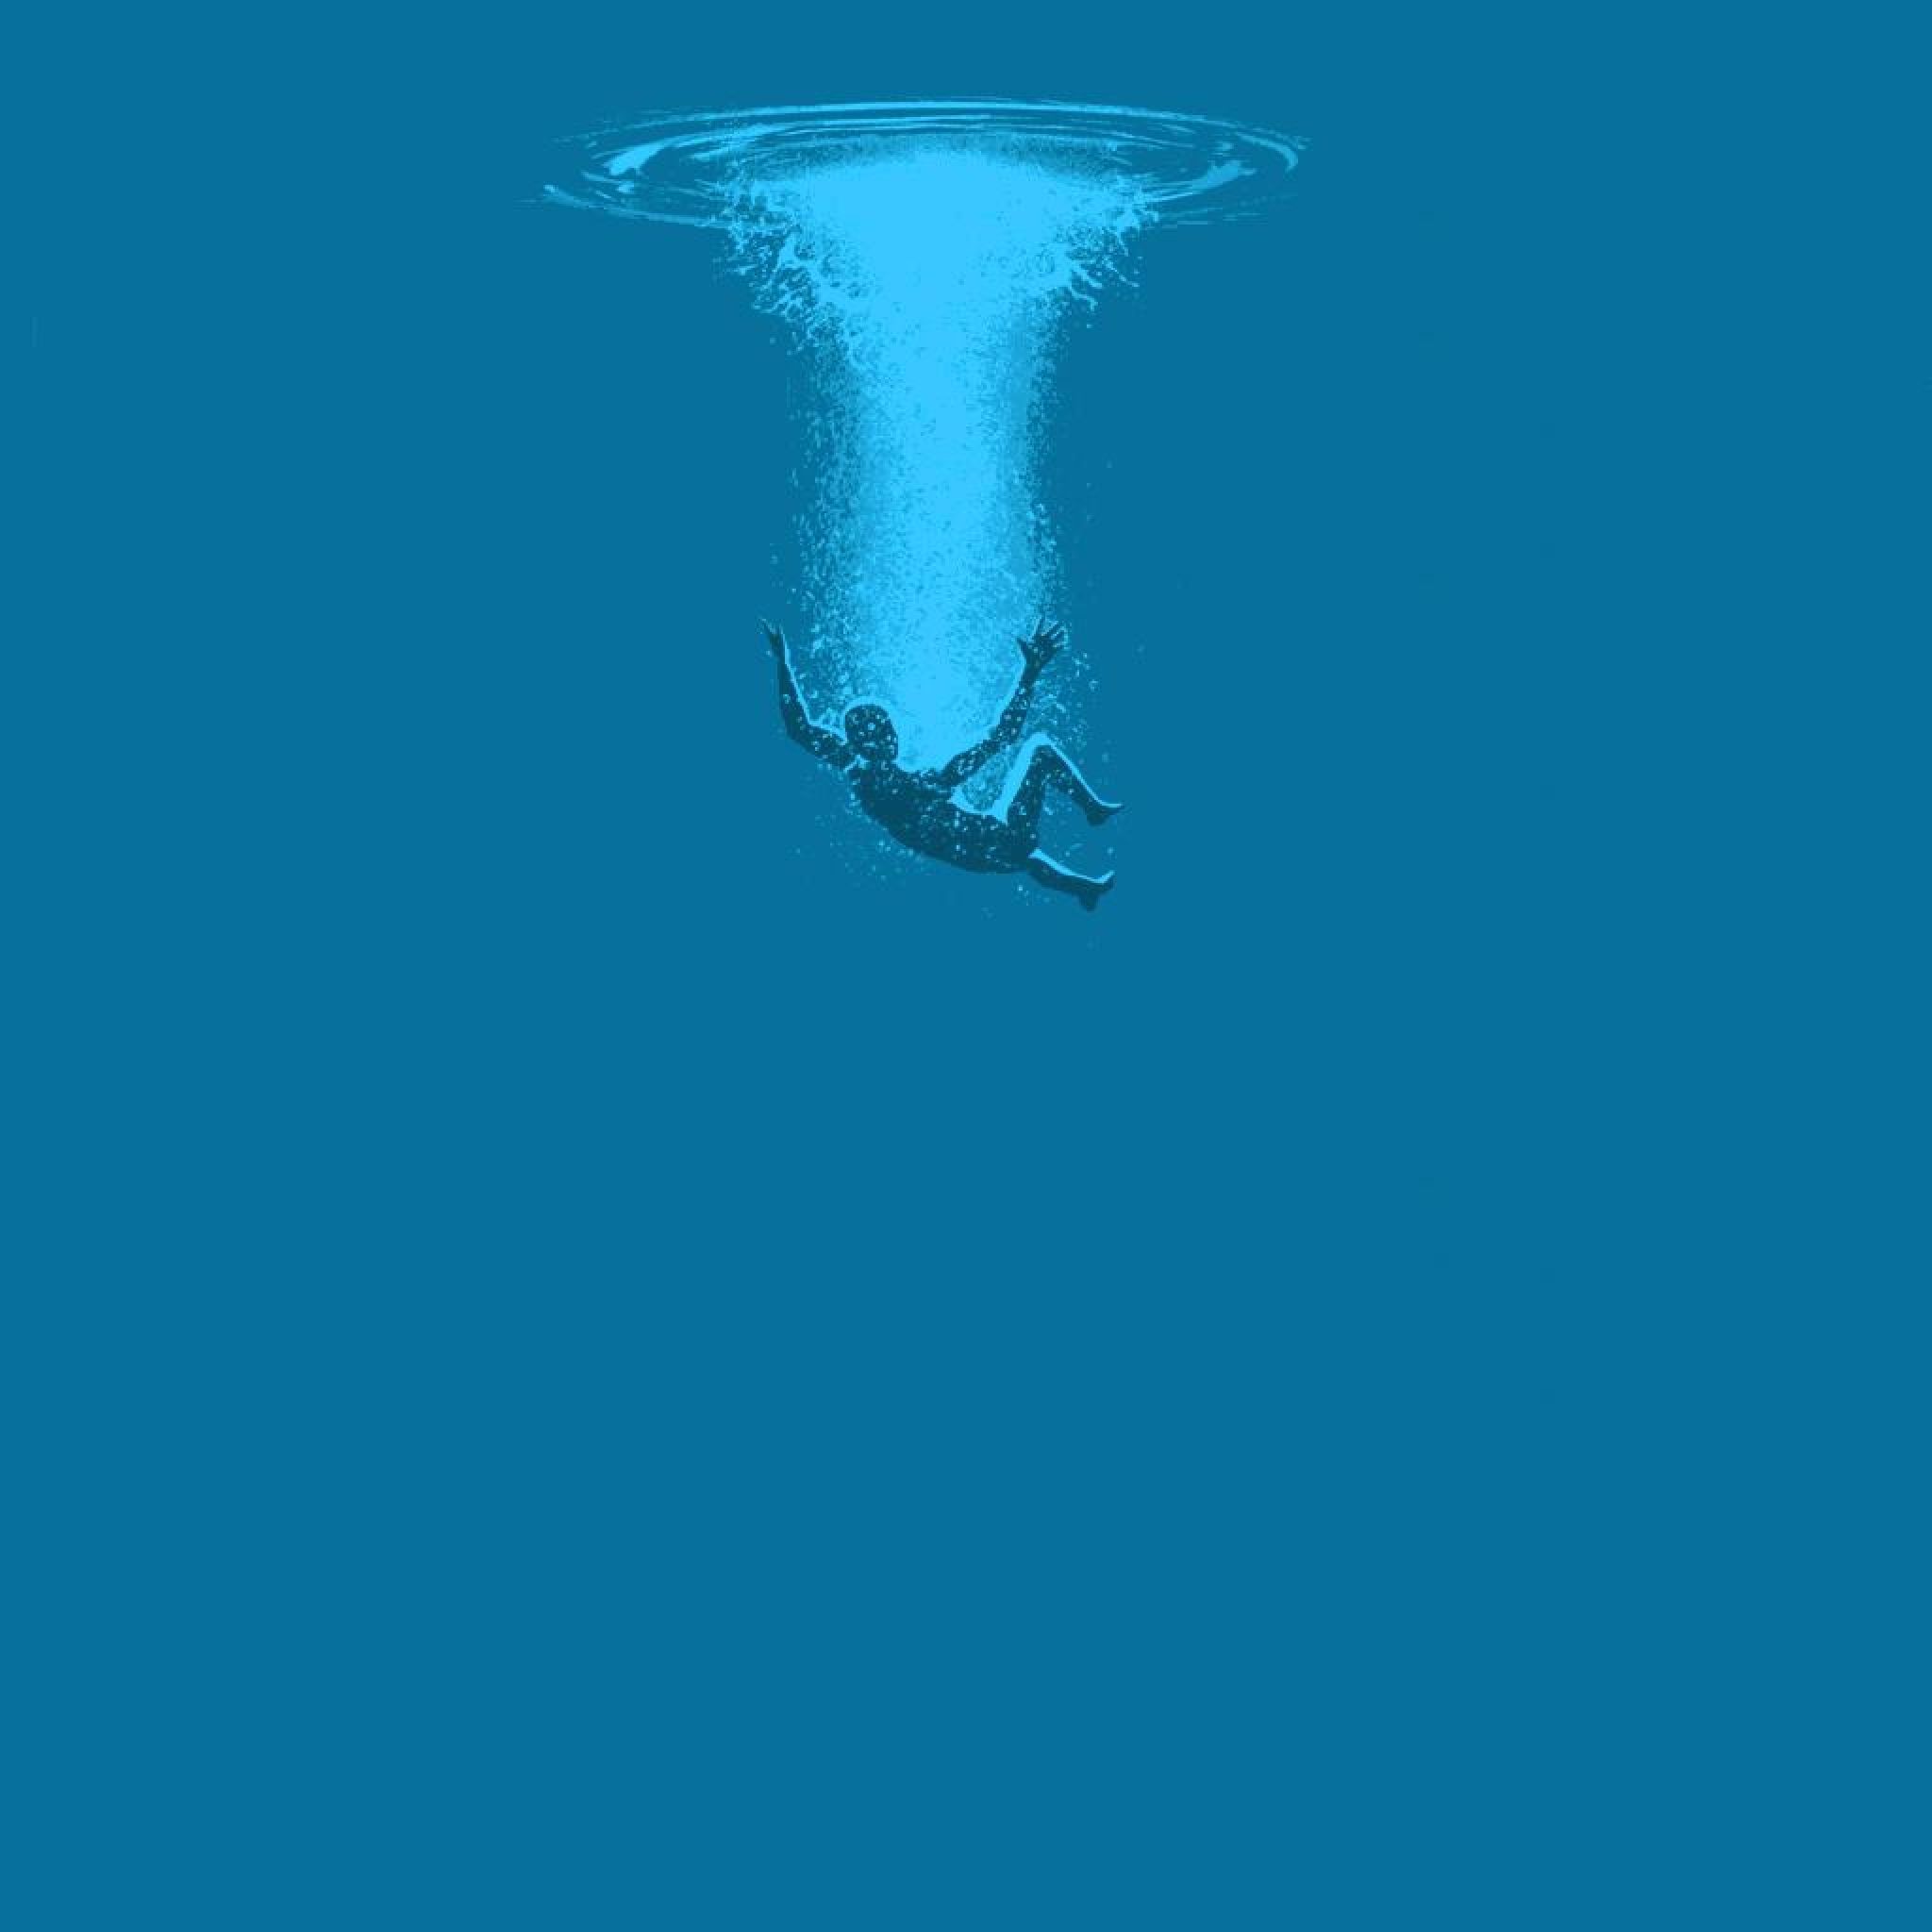 Drowning to see more boy in love wallpaper! - Drowning art, Drowning, Picture